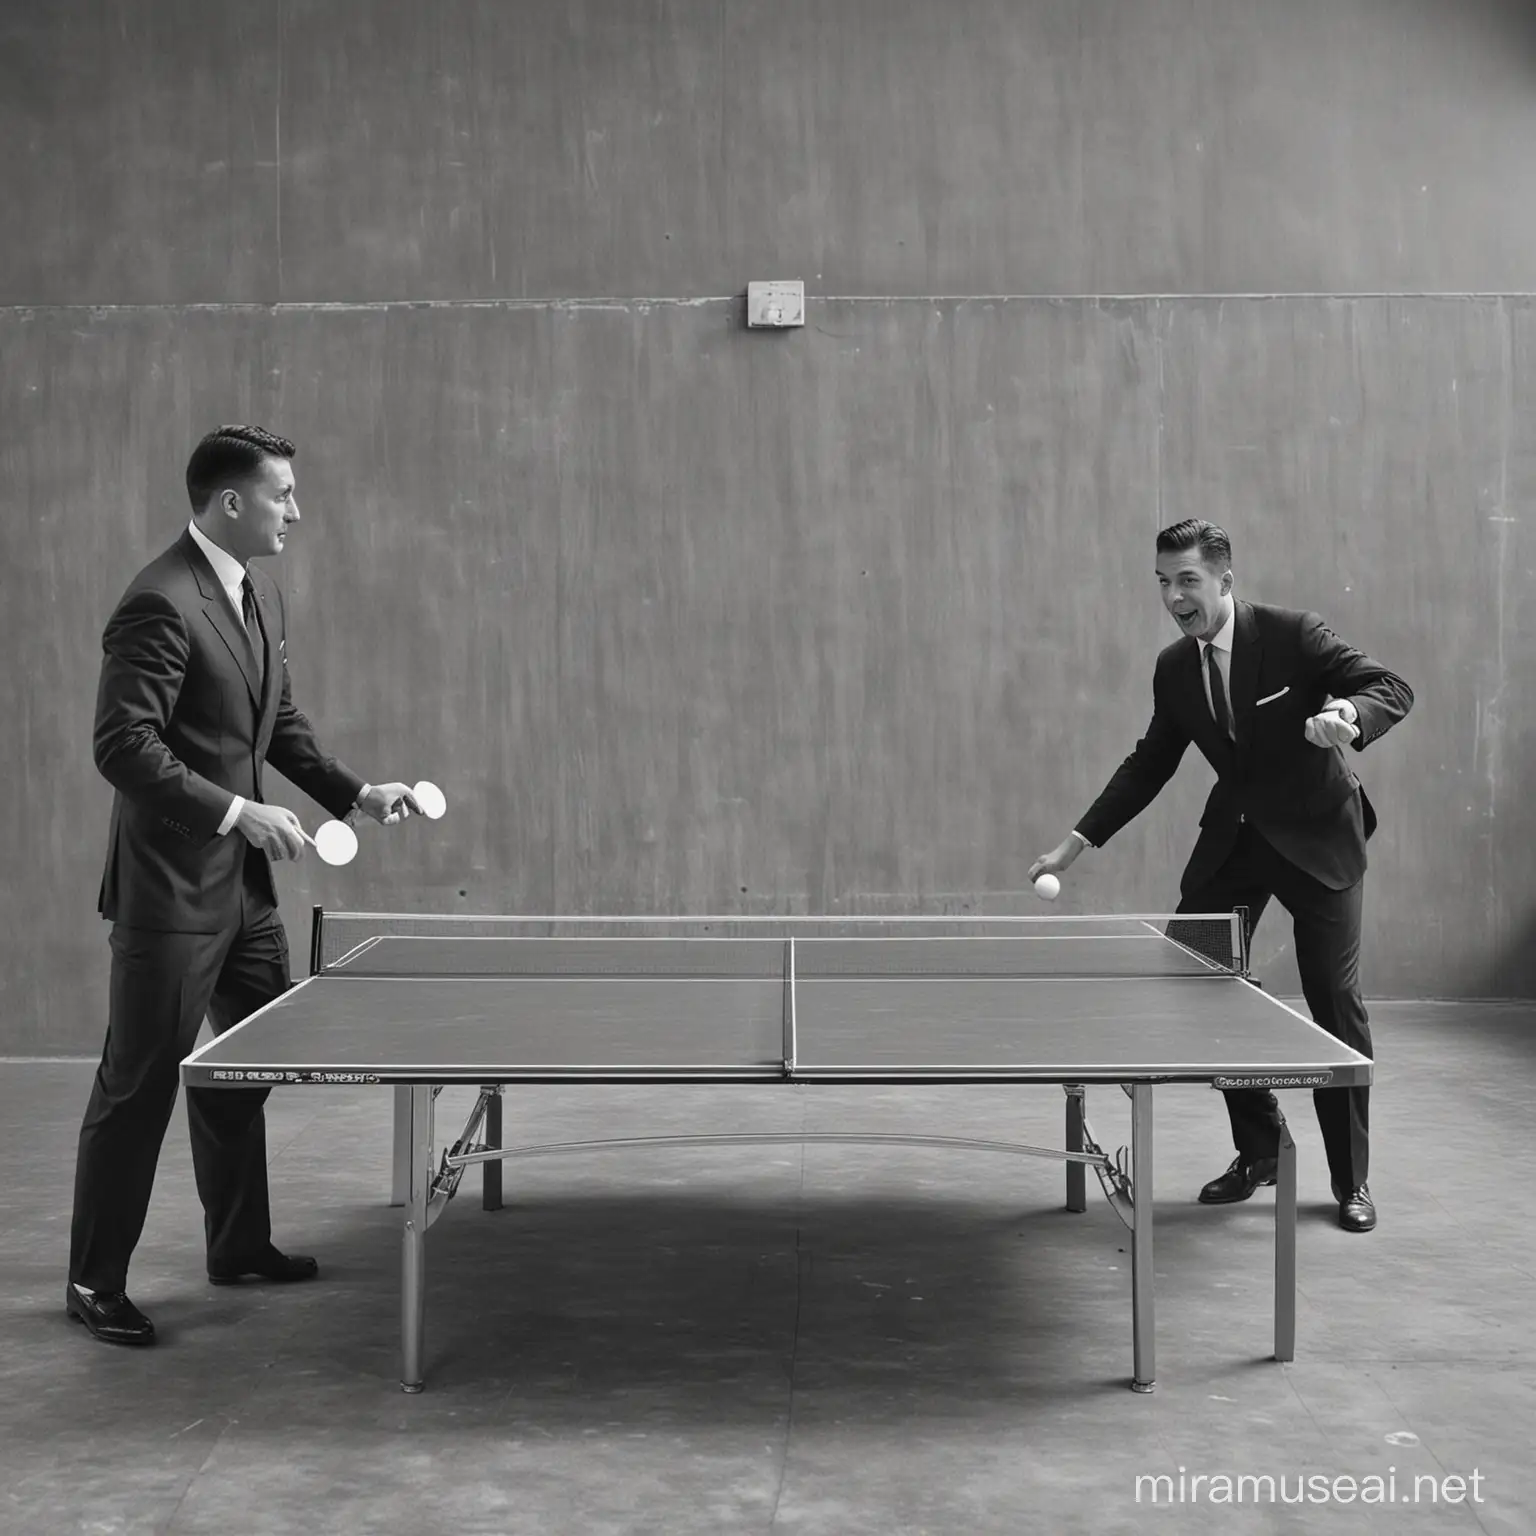 Businessmen in Formal Attire Playing Ping Pong